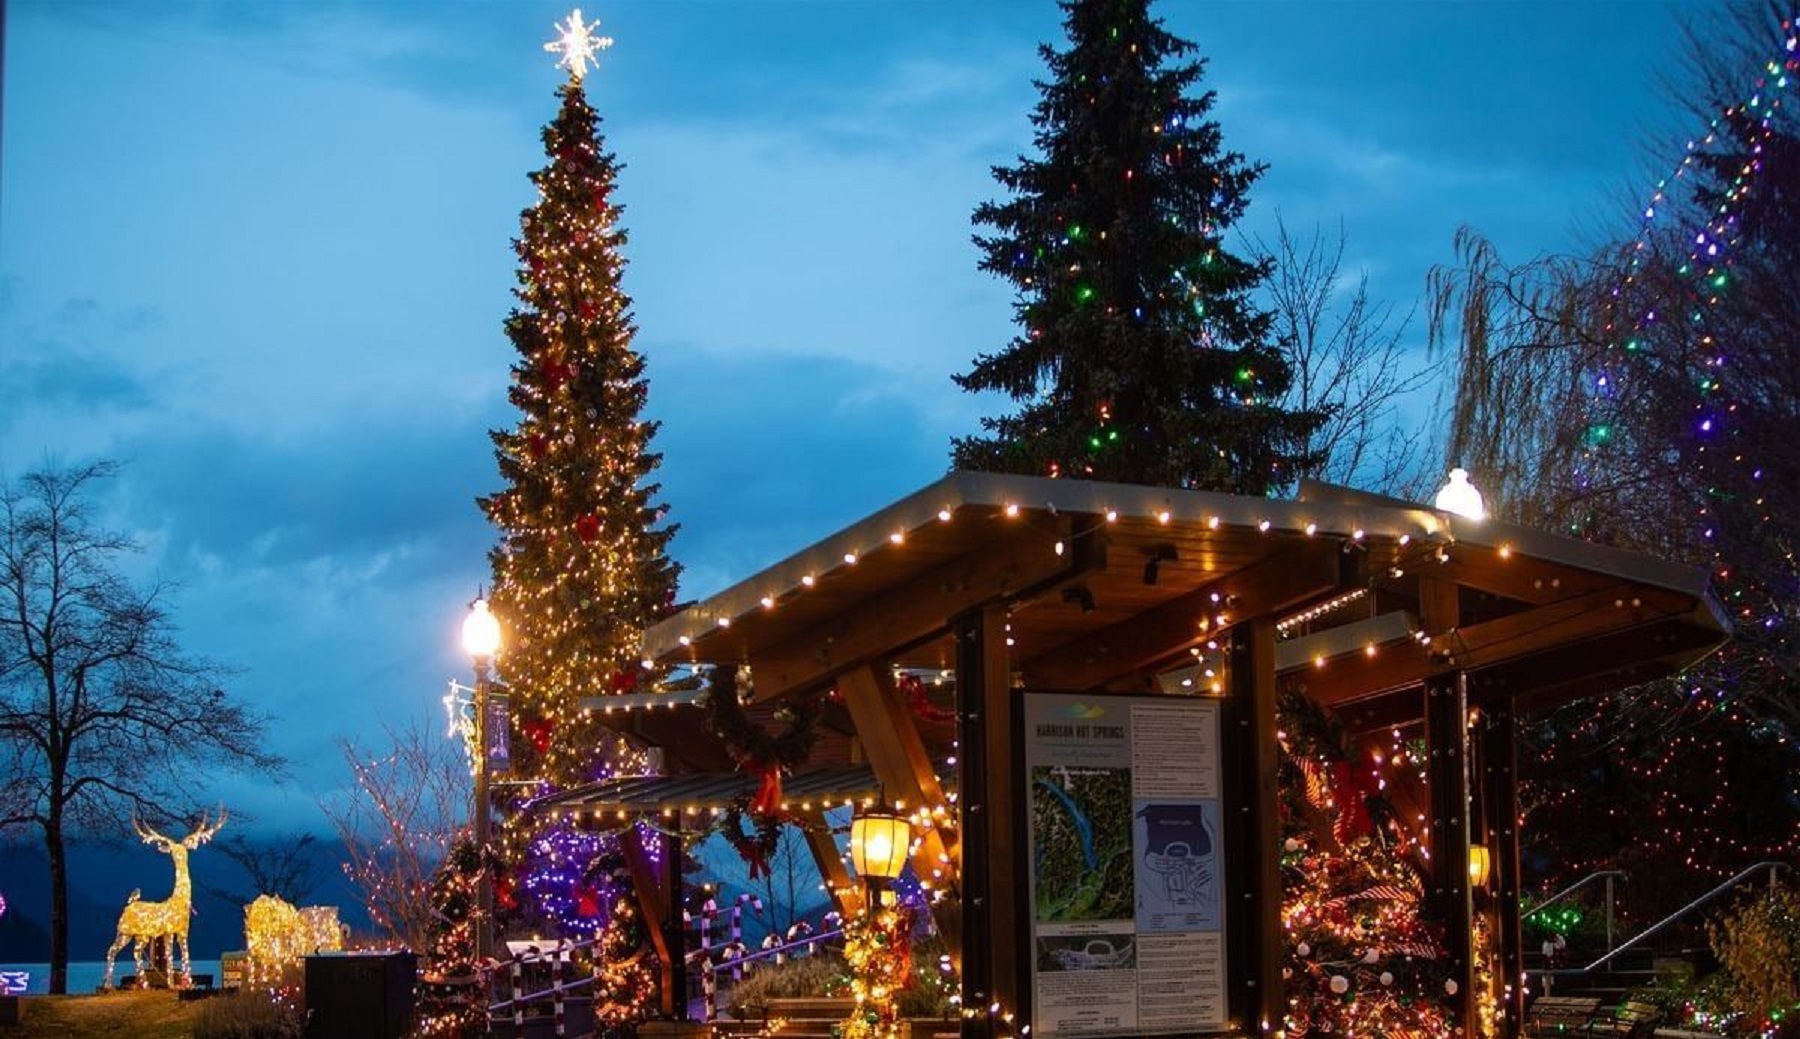 THIS LAKESIDE VILLAGE IS GETTING A HOLIDAY MAKEOVER WITH  LIGHTS